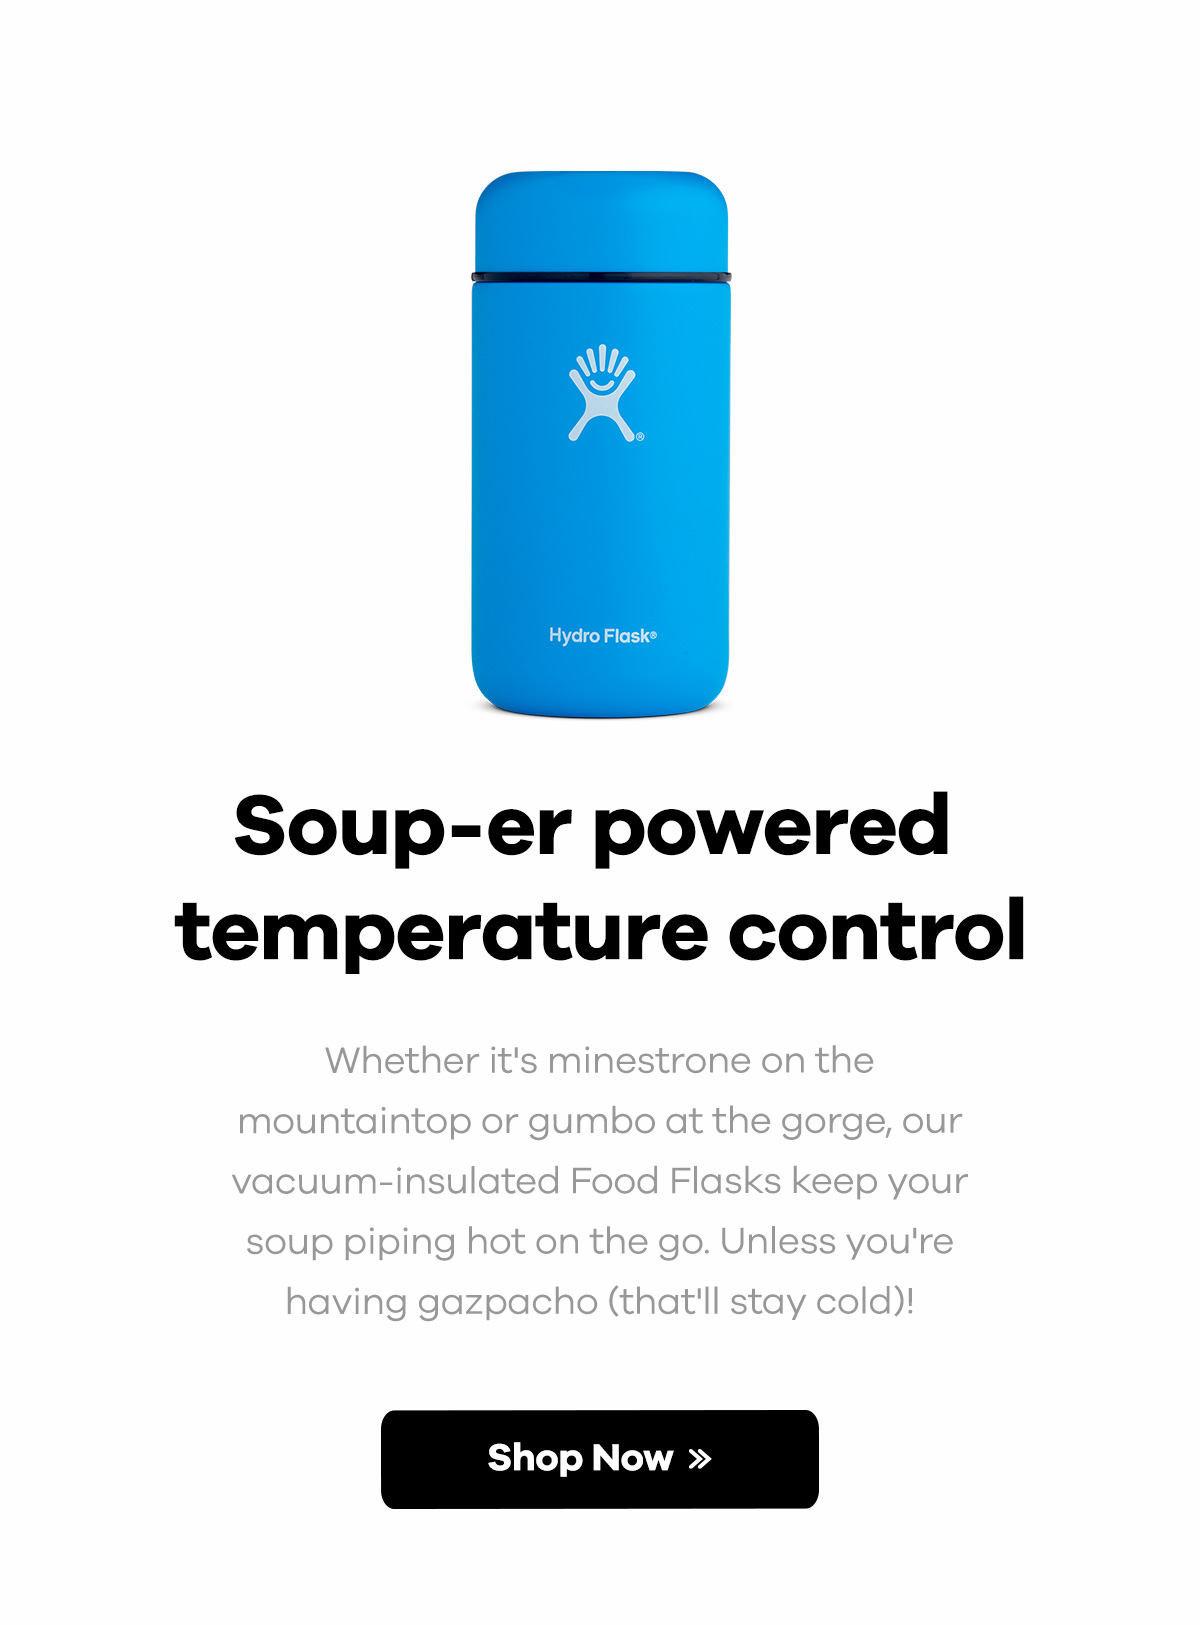 Soup-er powered temperature control | Whether it's minestrone on the mountaintop or gumbo at the gorge, our vacuum-insulated Food Flasks keep your soup piping hot on the go. Unless you're having gazpacho (that'll stay cold)! | SHOP NOW >>